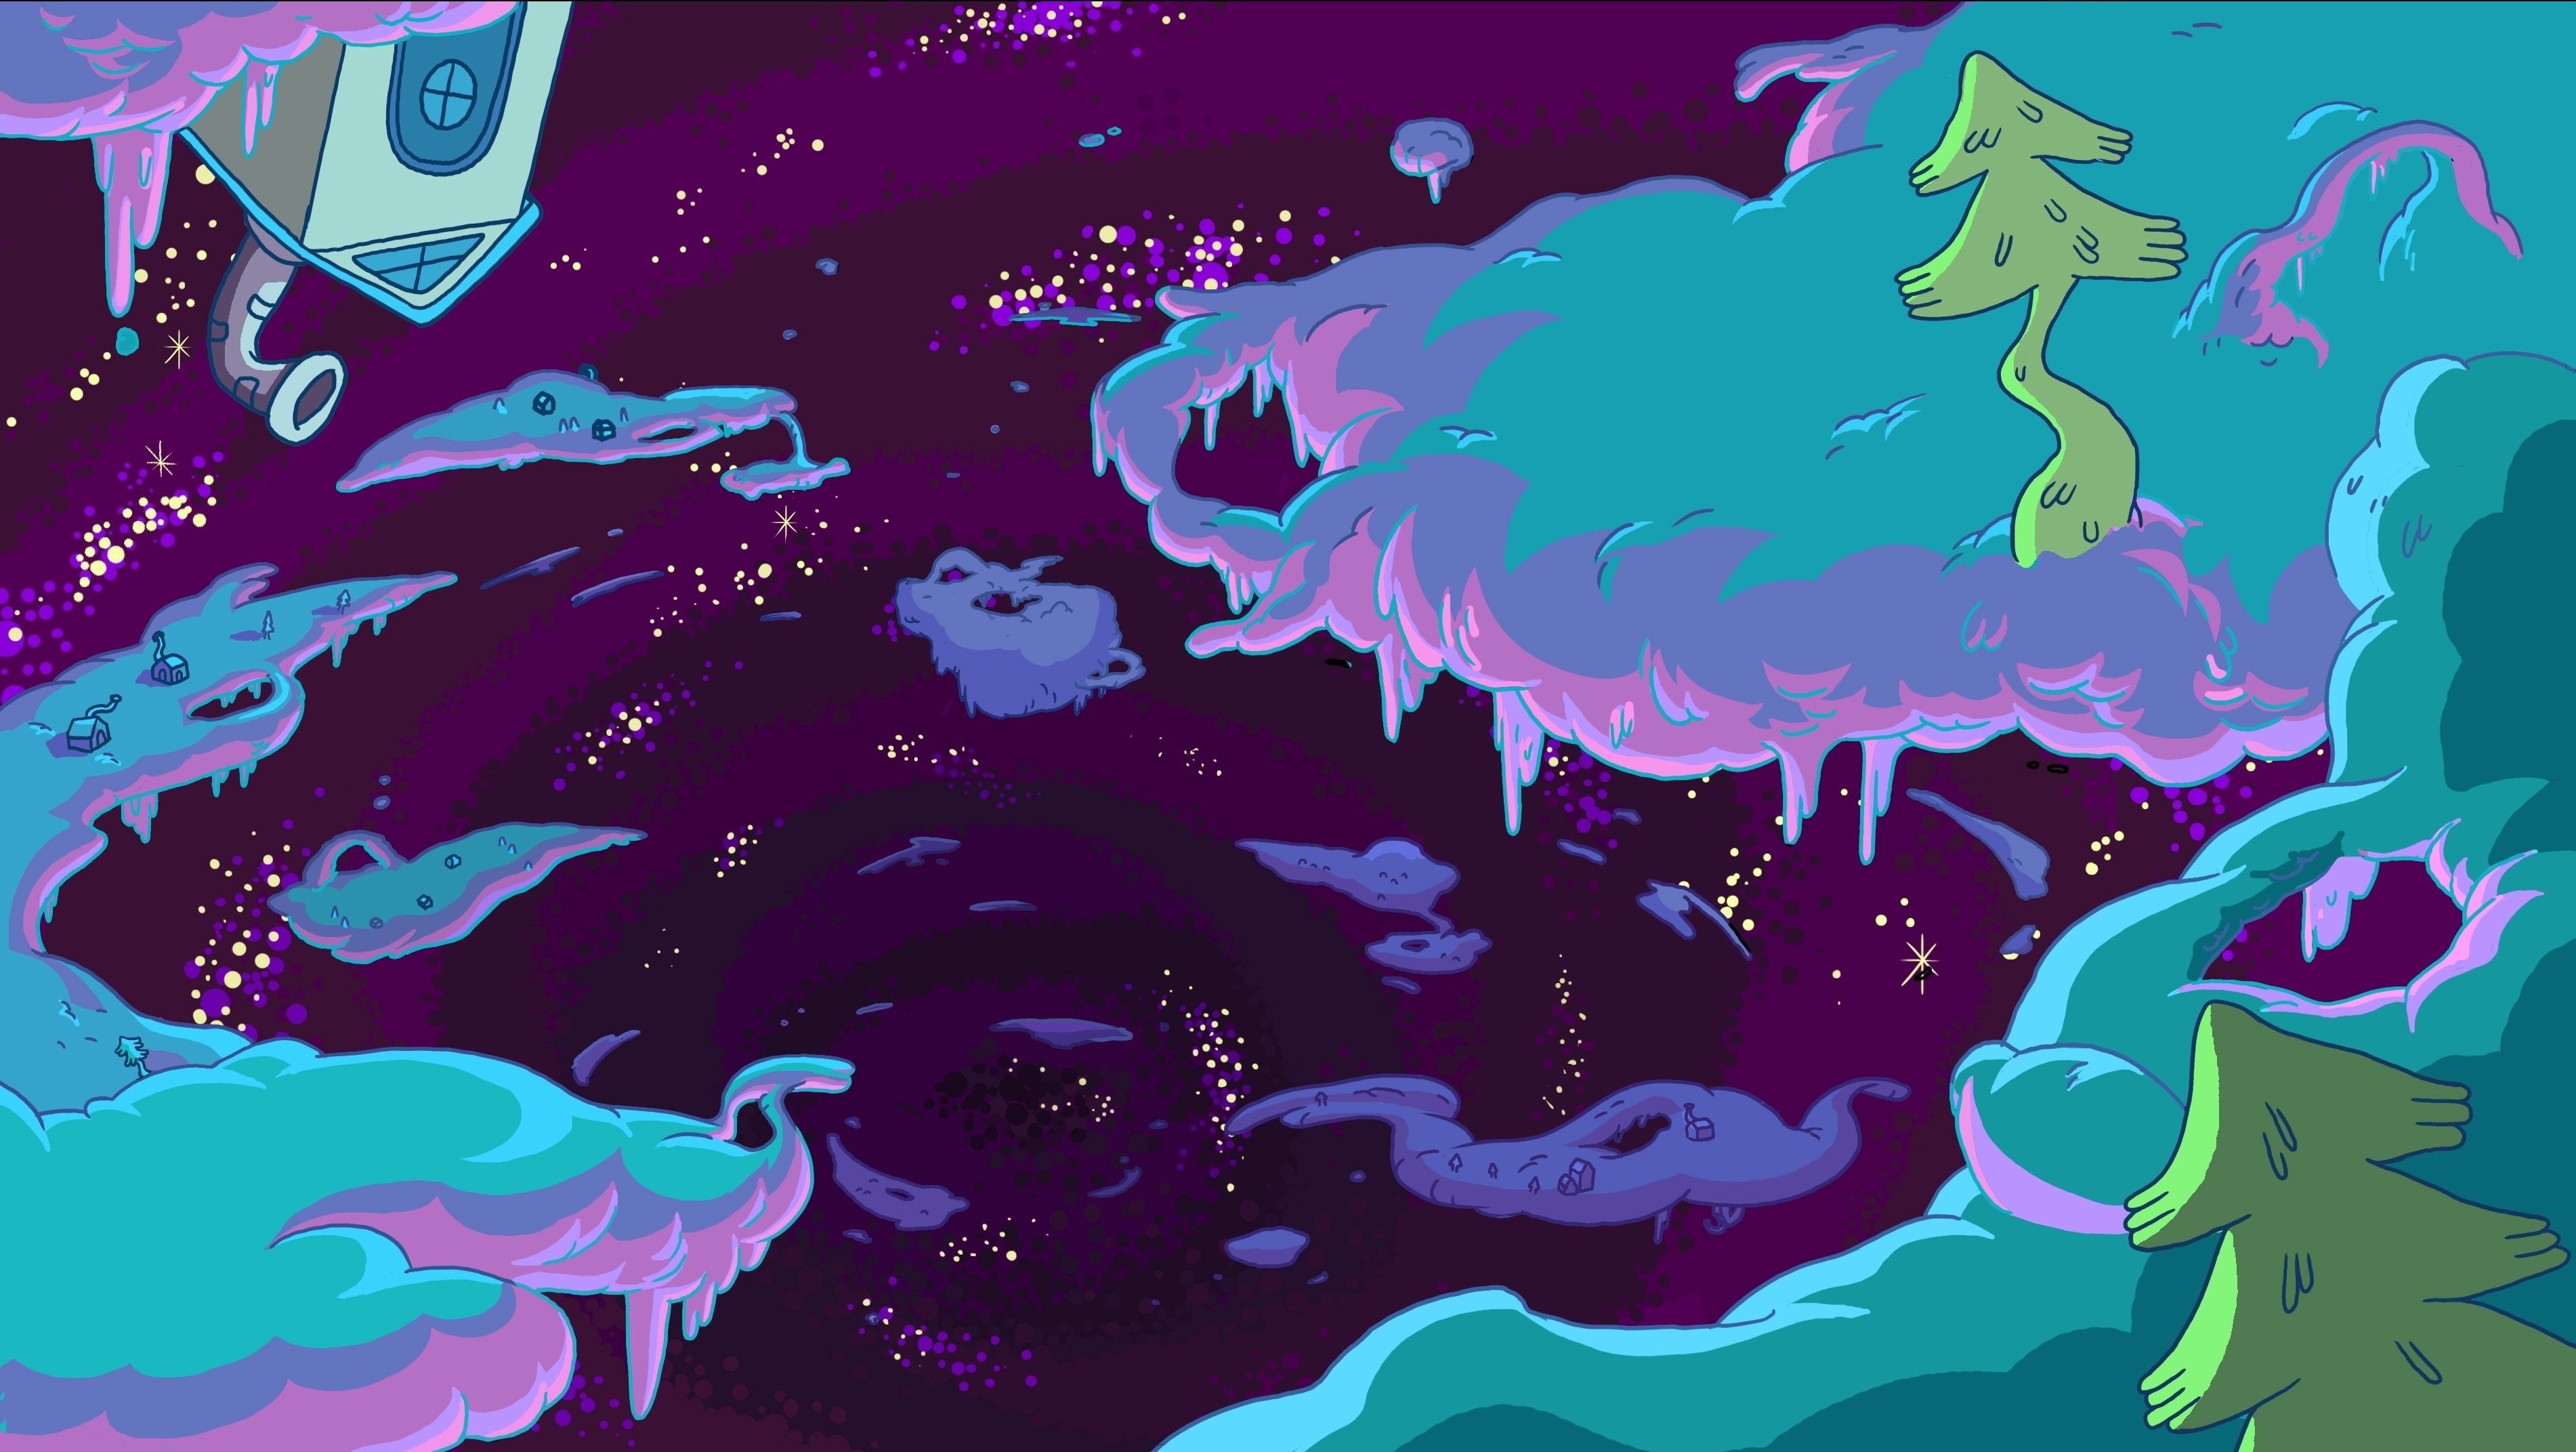 Share 64 Adventure Time Aesthetic Wallpaper Incdgdbentre